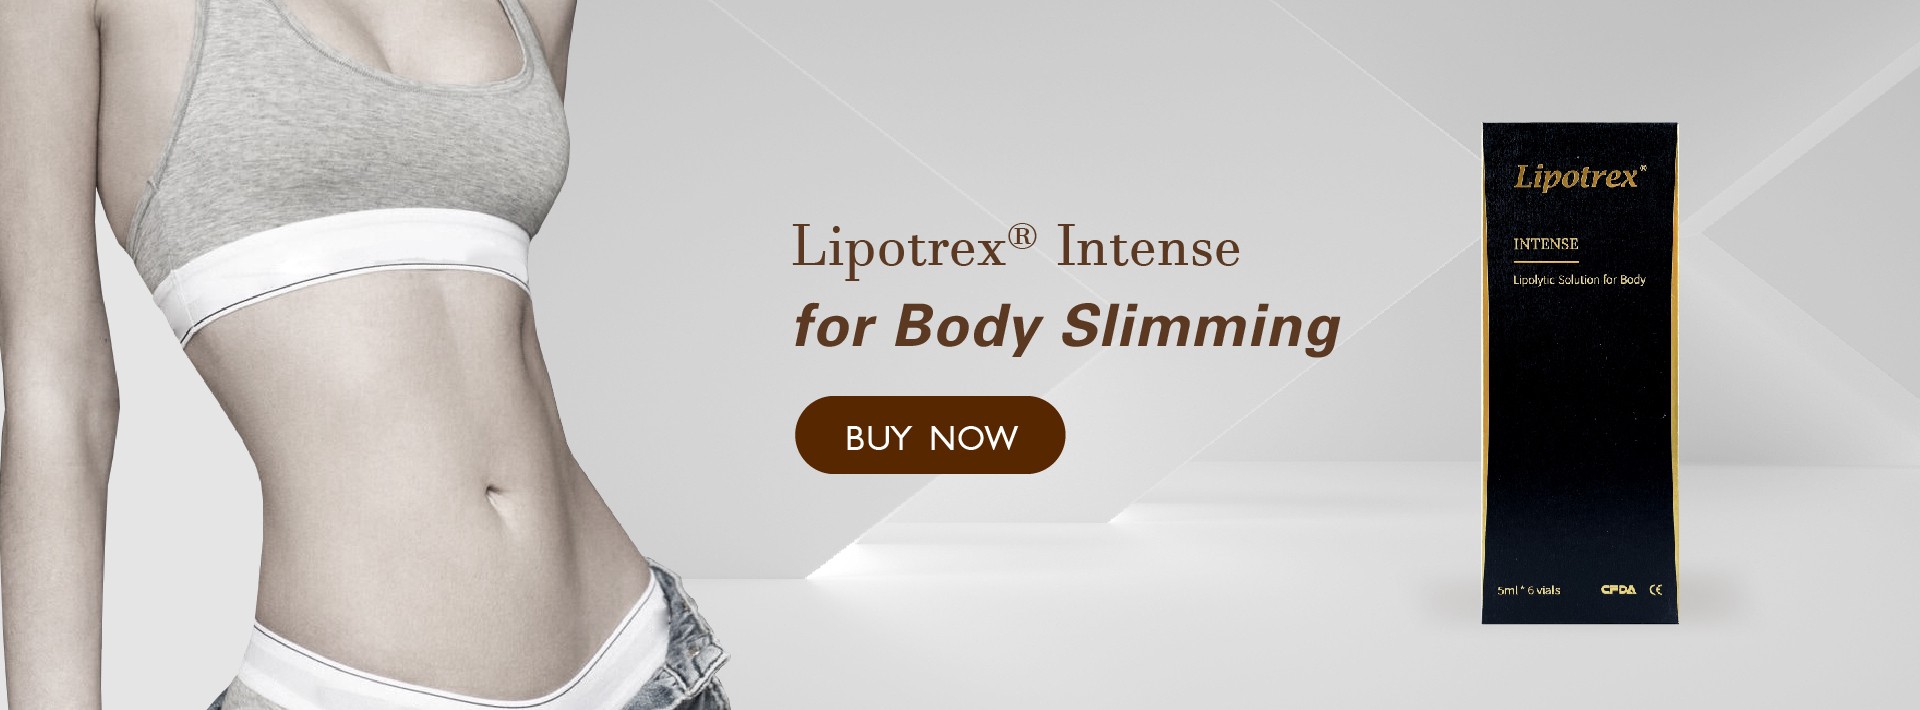 Lipotrex-Smooth-for-body-slimming